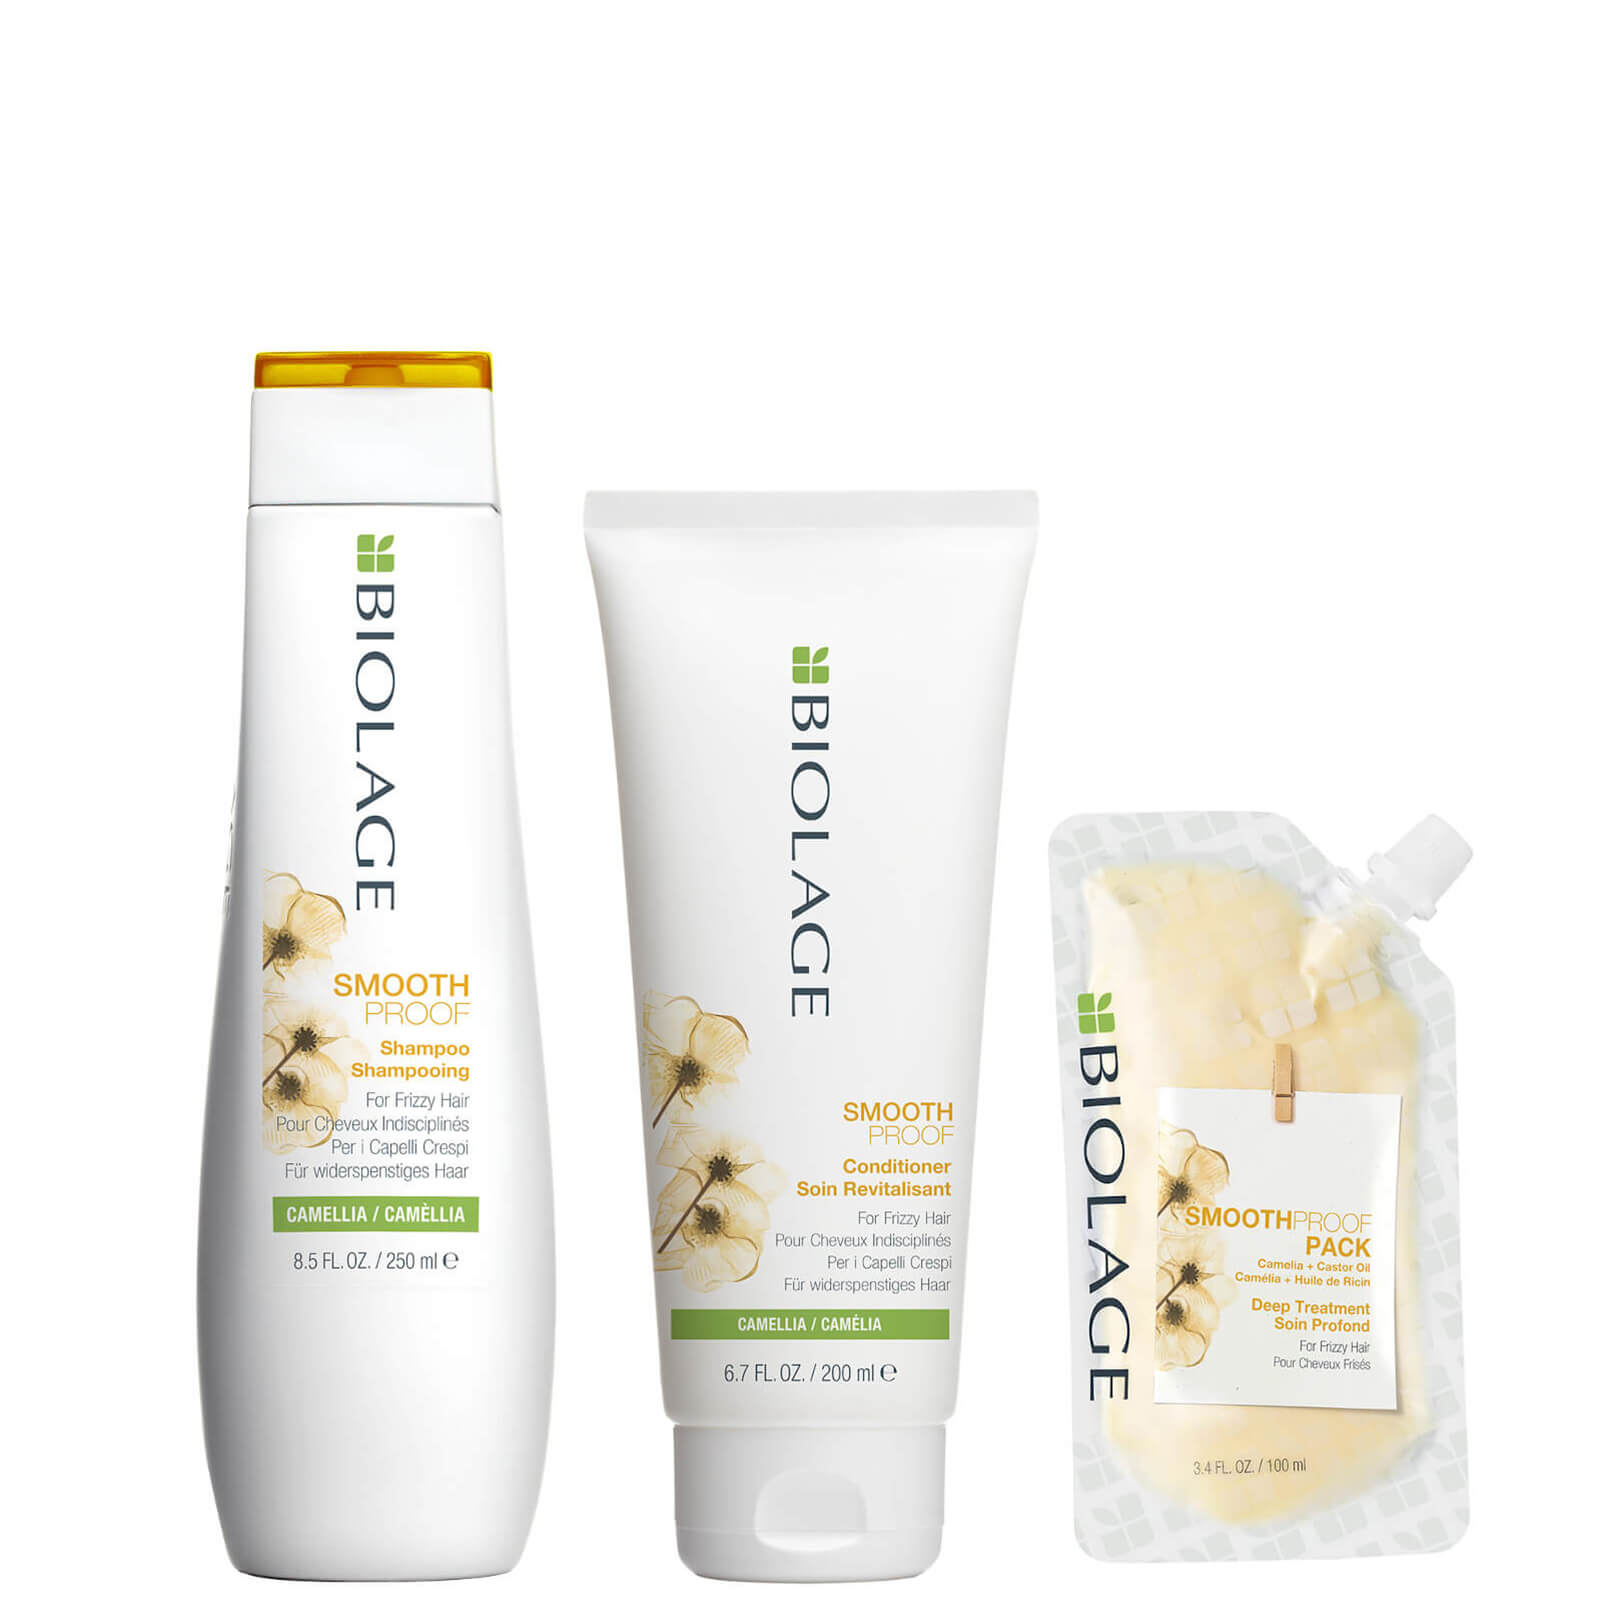 Image of Biolage SmoothProof Shampoo, Conditioner and Deep Hair Treatment Routine for Frizzy Hair